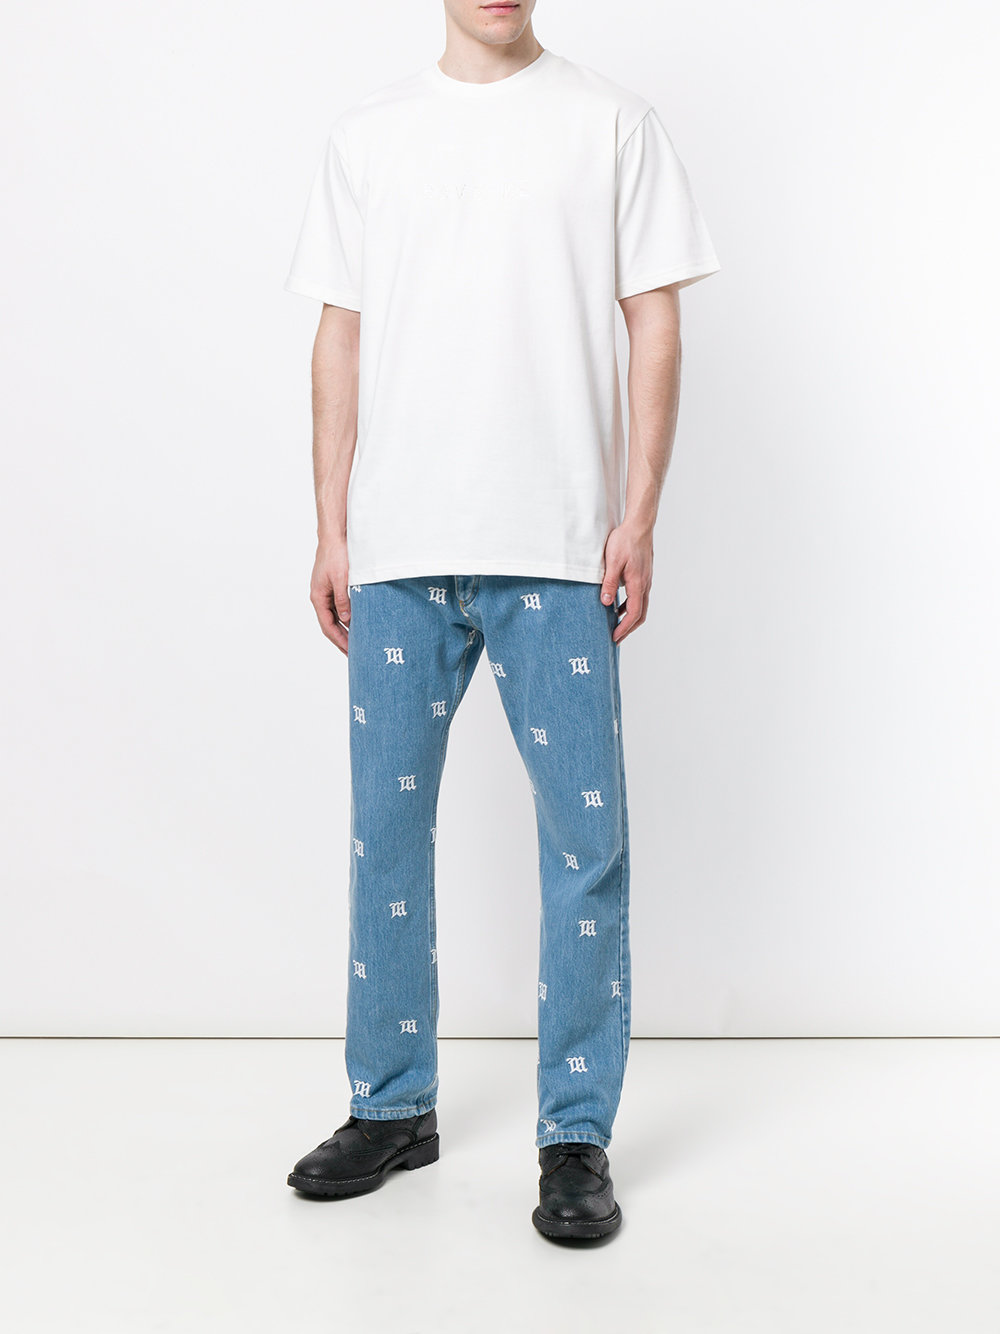 PAUSE Picks: 20 Denim Items to Buy Now – PAUSE Online | Men's Fashion ...